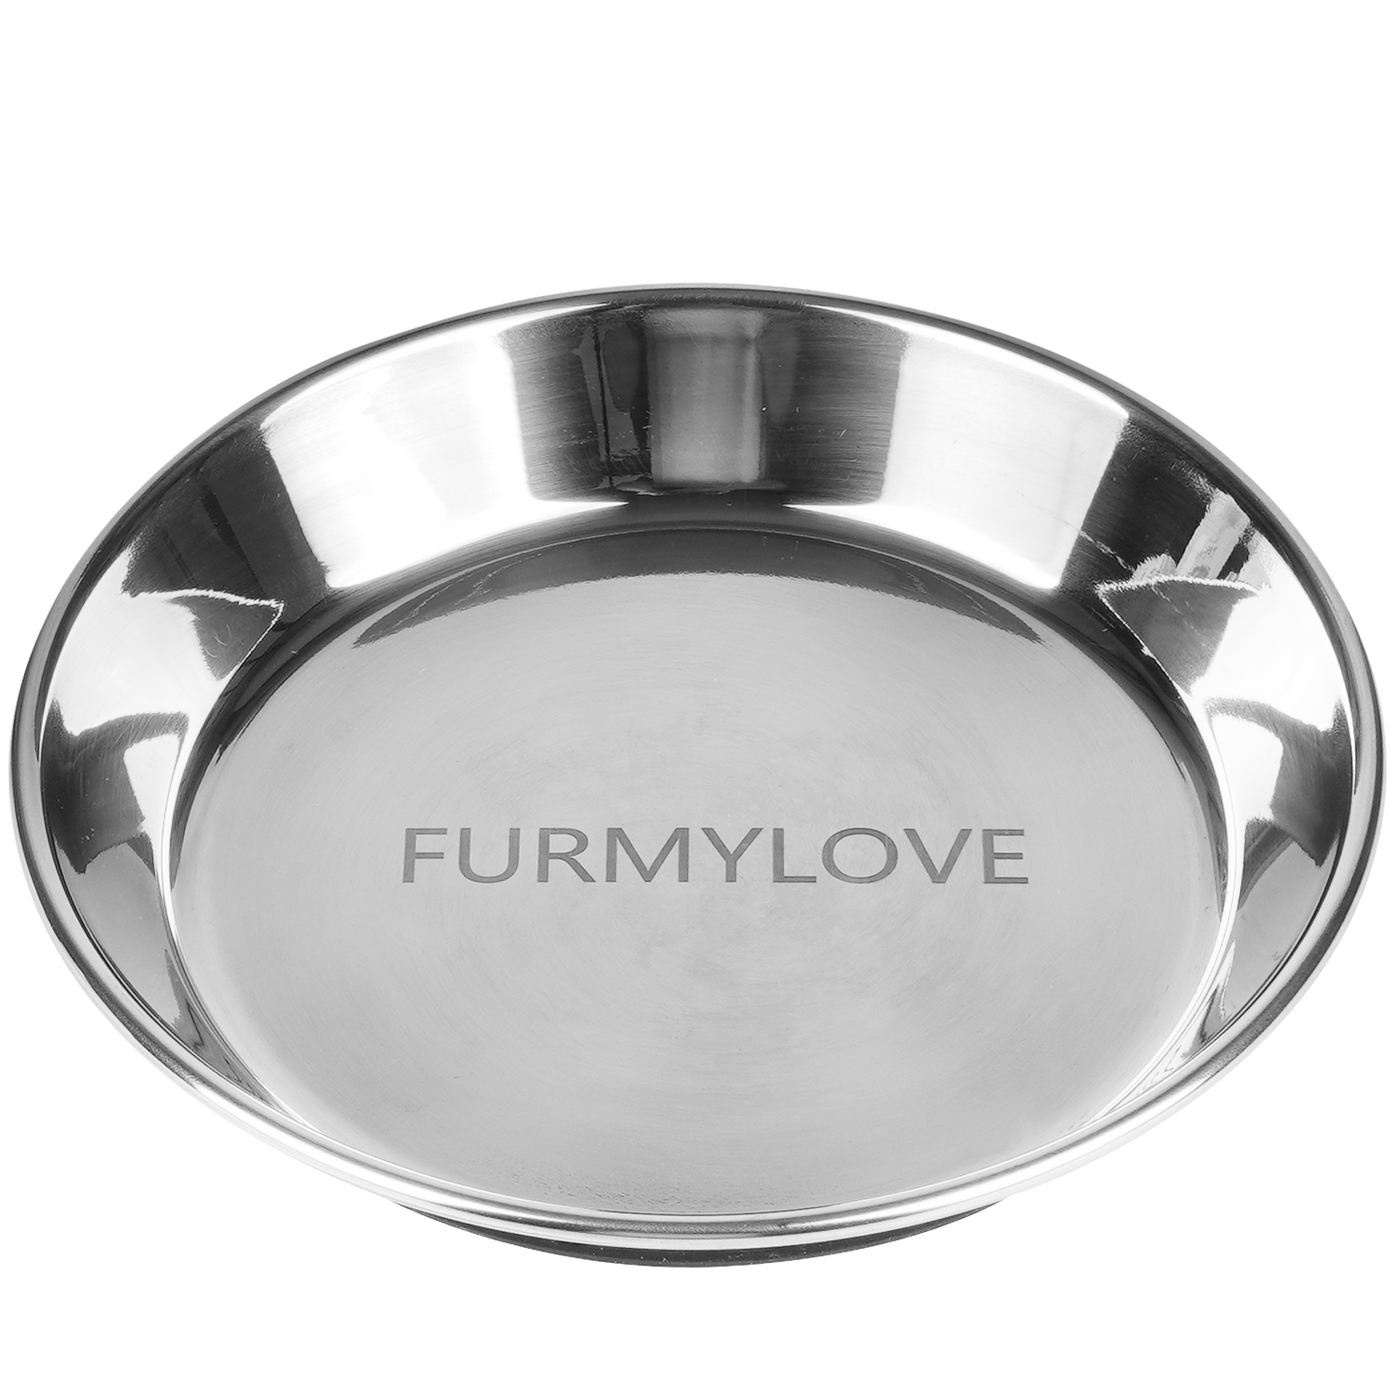 FURMYLOVE Stainless Steel Non-Slip Cat Dish Whisker Friendly Shallow for Food and Water Non-Slip Silicone Bottom Heavy Duty